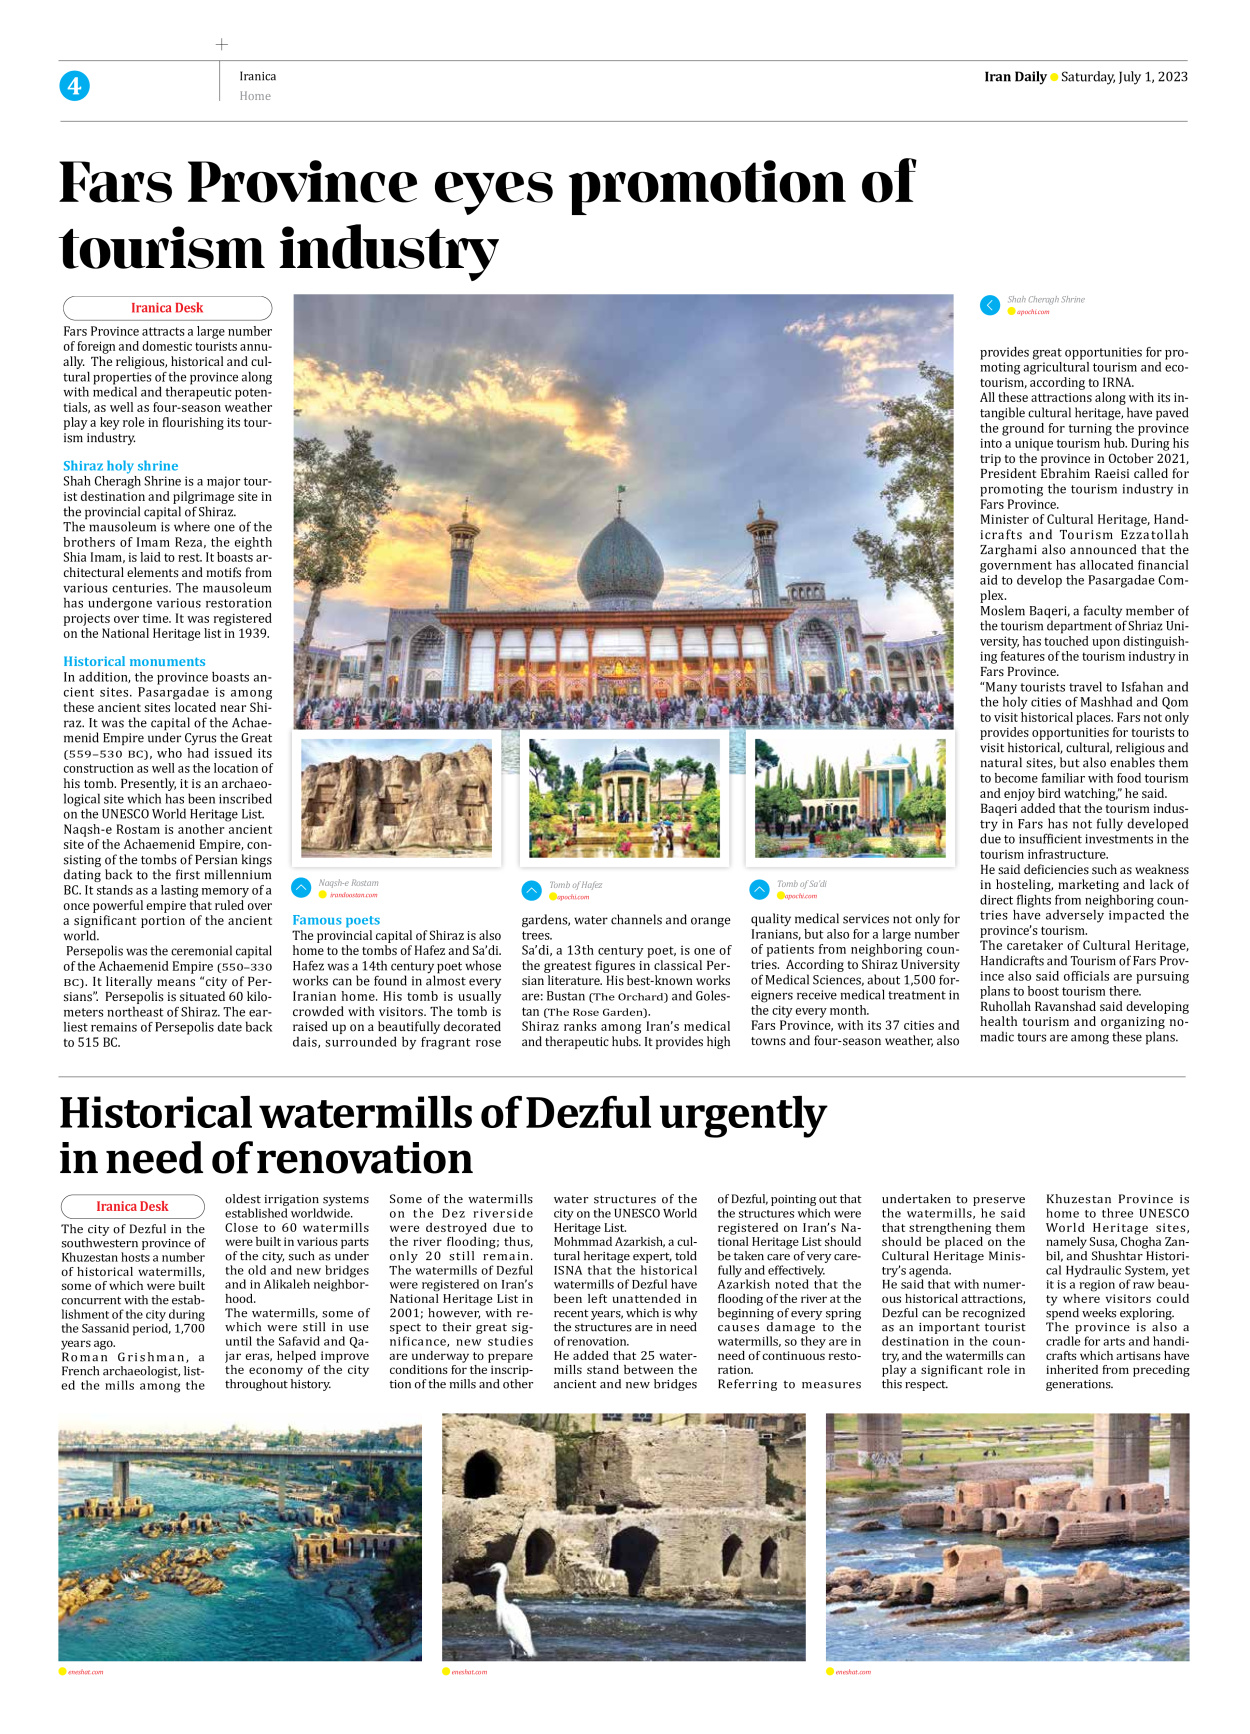 Iran Daily - Number Seven Thousand Three Hundred and Twenty Seven - 01 July 2023 - Page 4